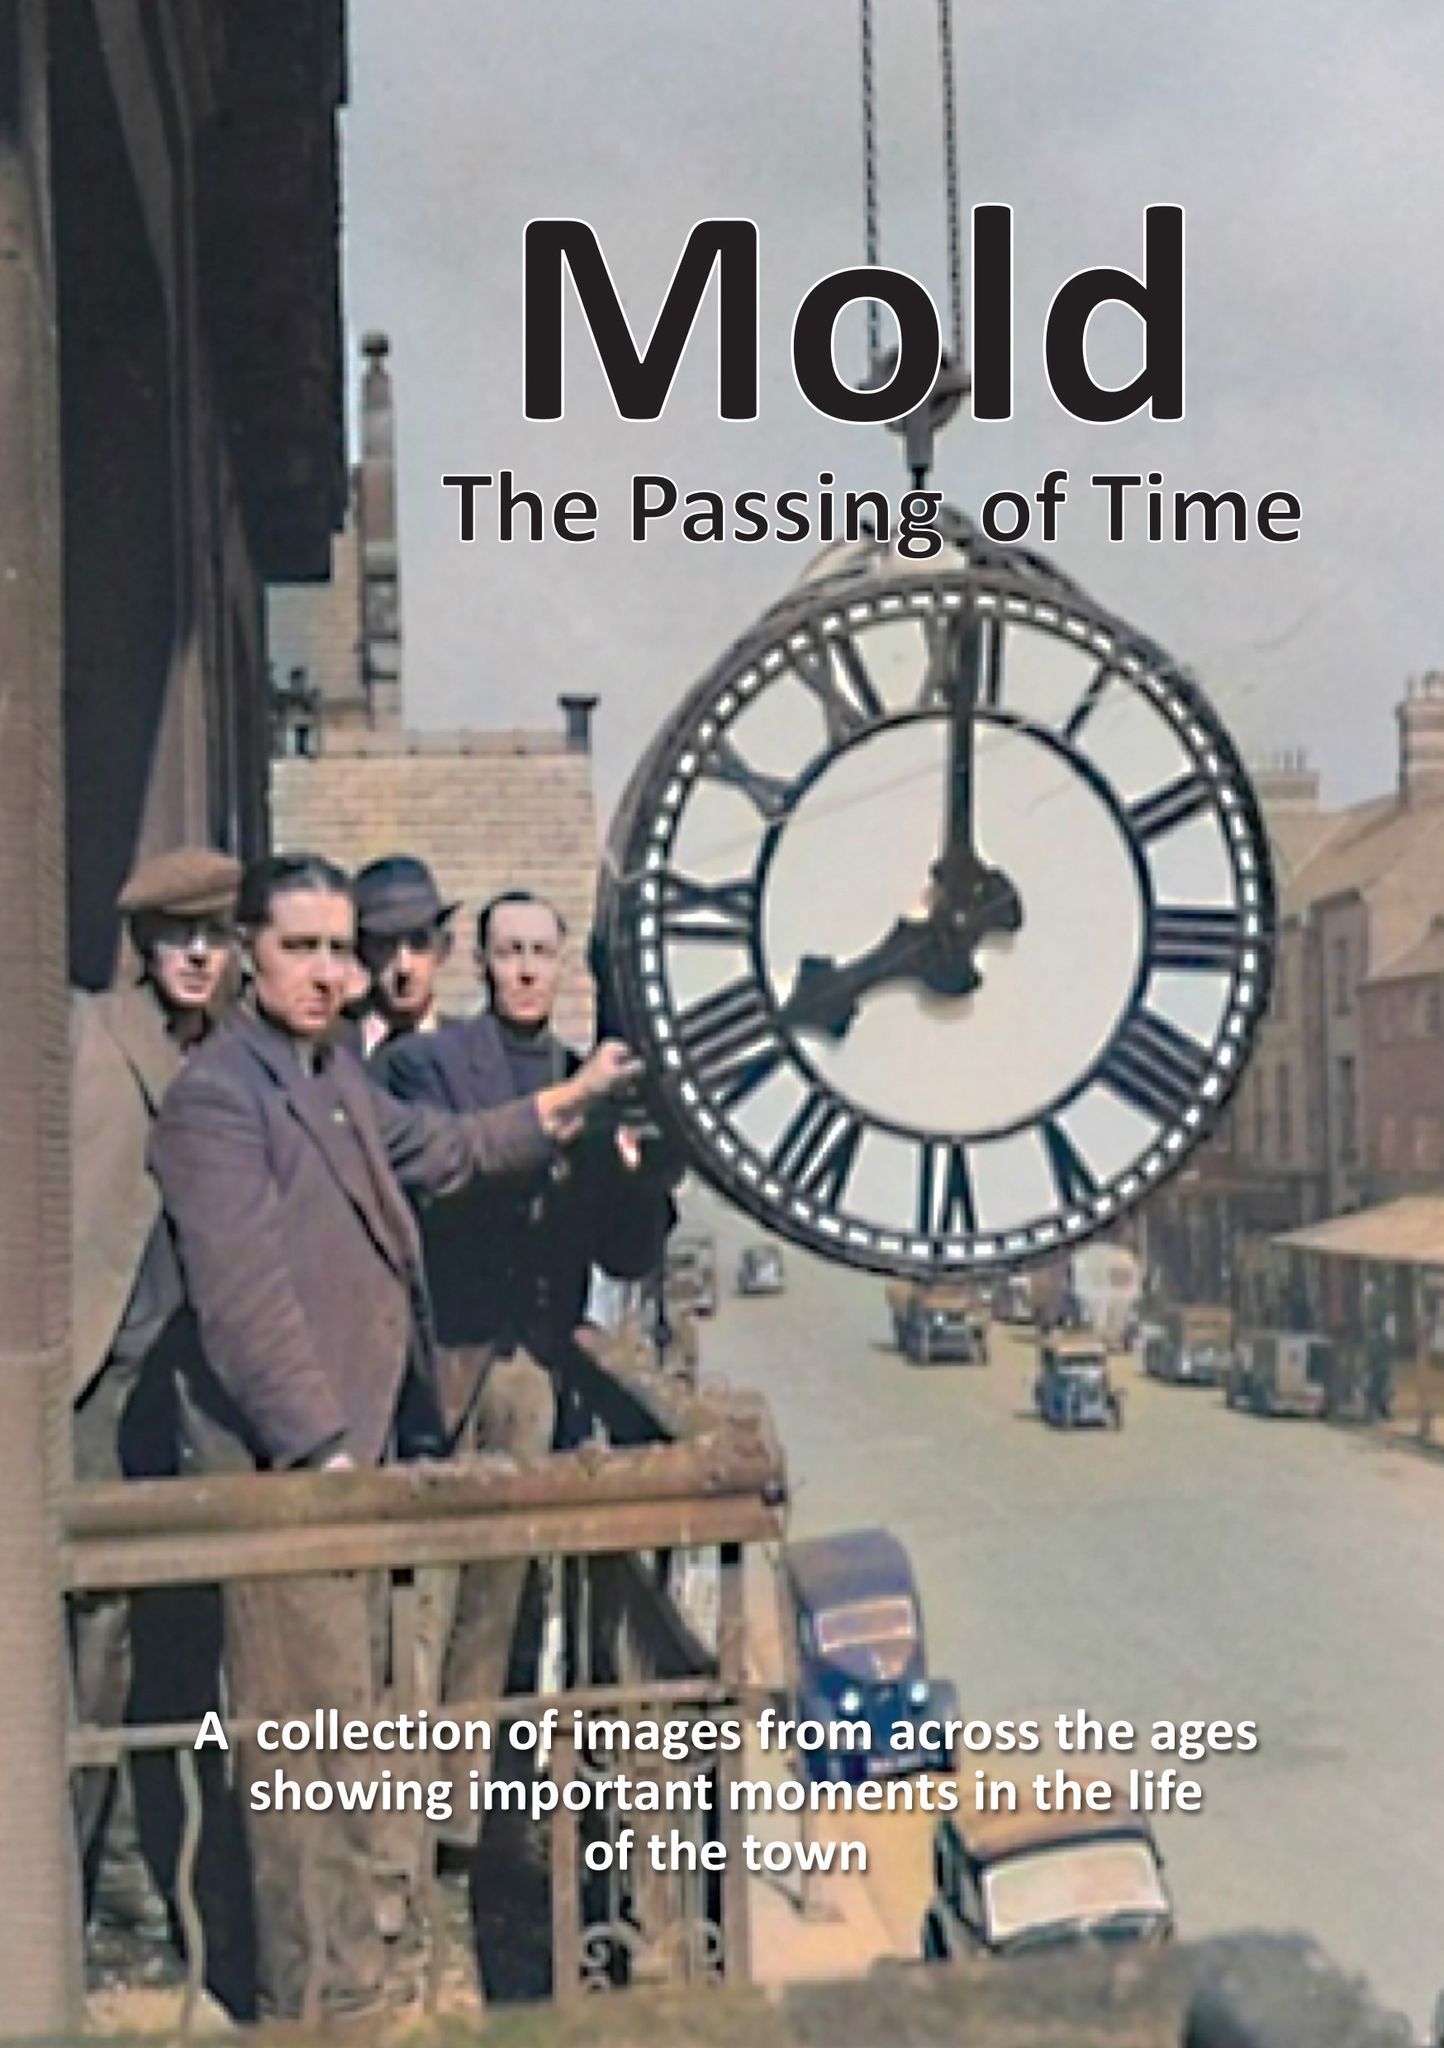 The cover image of Mold: The Passing of Time, shows the installation or maintenance of the clock on the Assembly Rooms in the town.